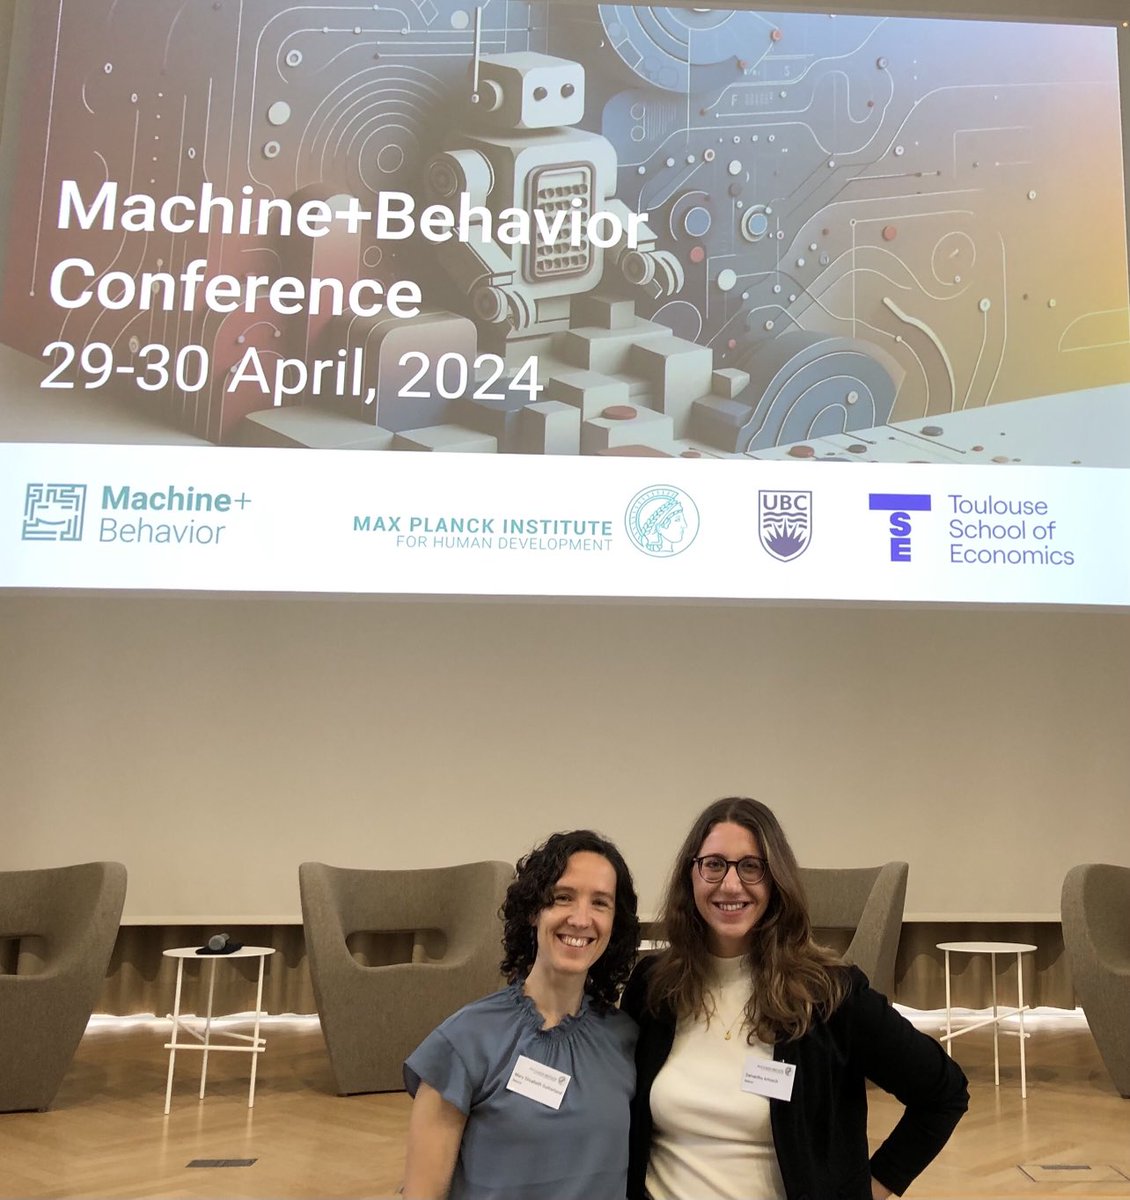 I’m delighted to be at the #machine+behavior conference organized by ⁦@iyadrahwan⁩ ⁦@JFBonnefon⁩ ⁦@azimshariff⁩ in Berlin representing@nature with my lovely colleague ⁦@SamanthaAntusch⁩ from ⁦⁦@NatureHumBehav⁩